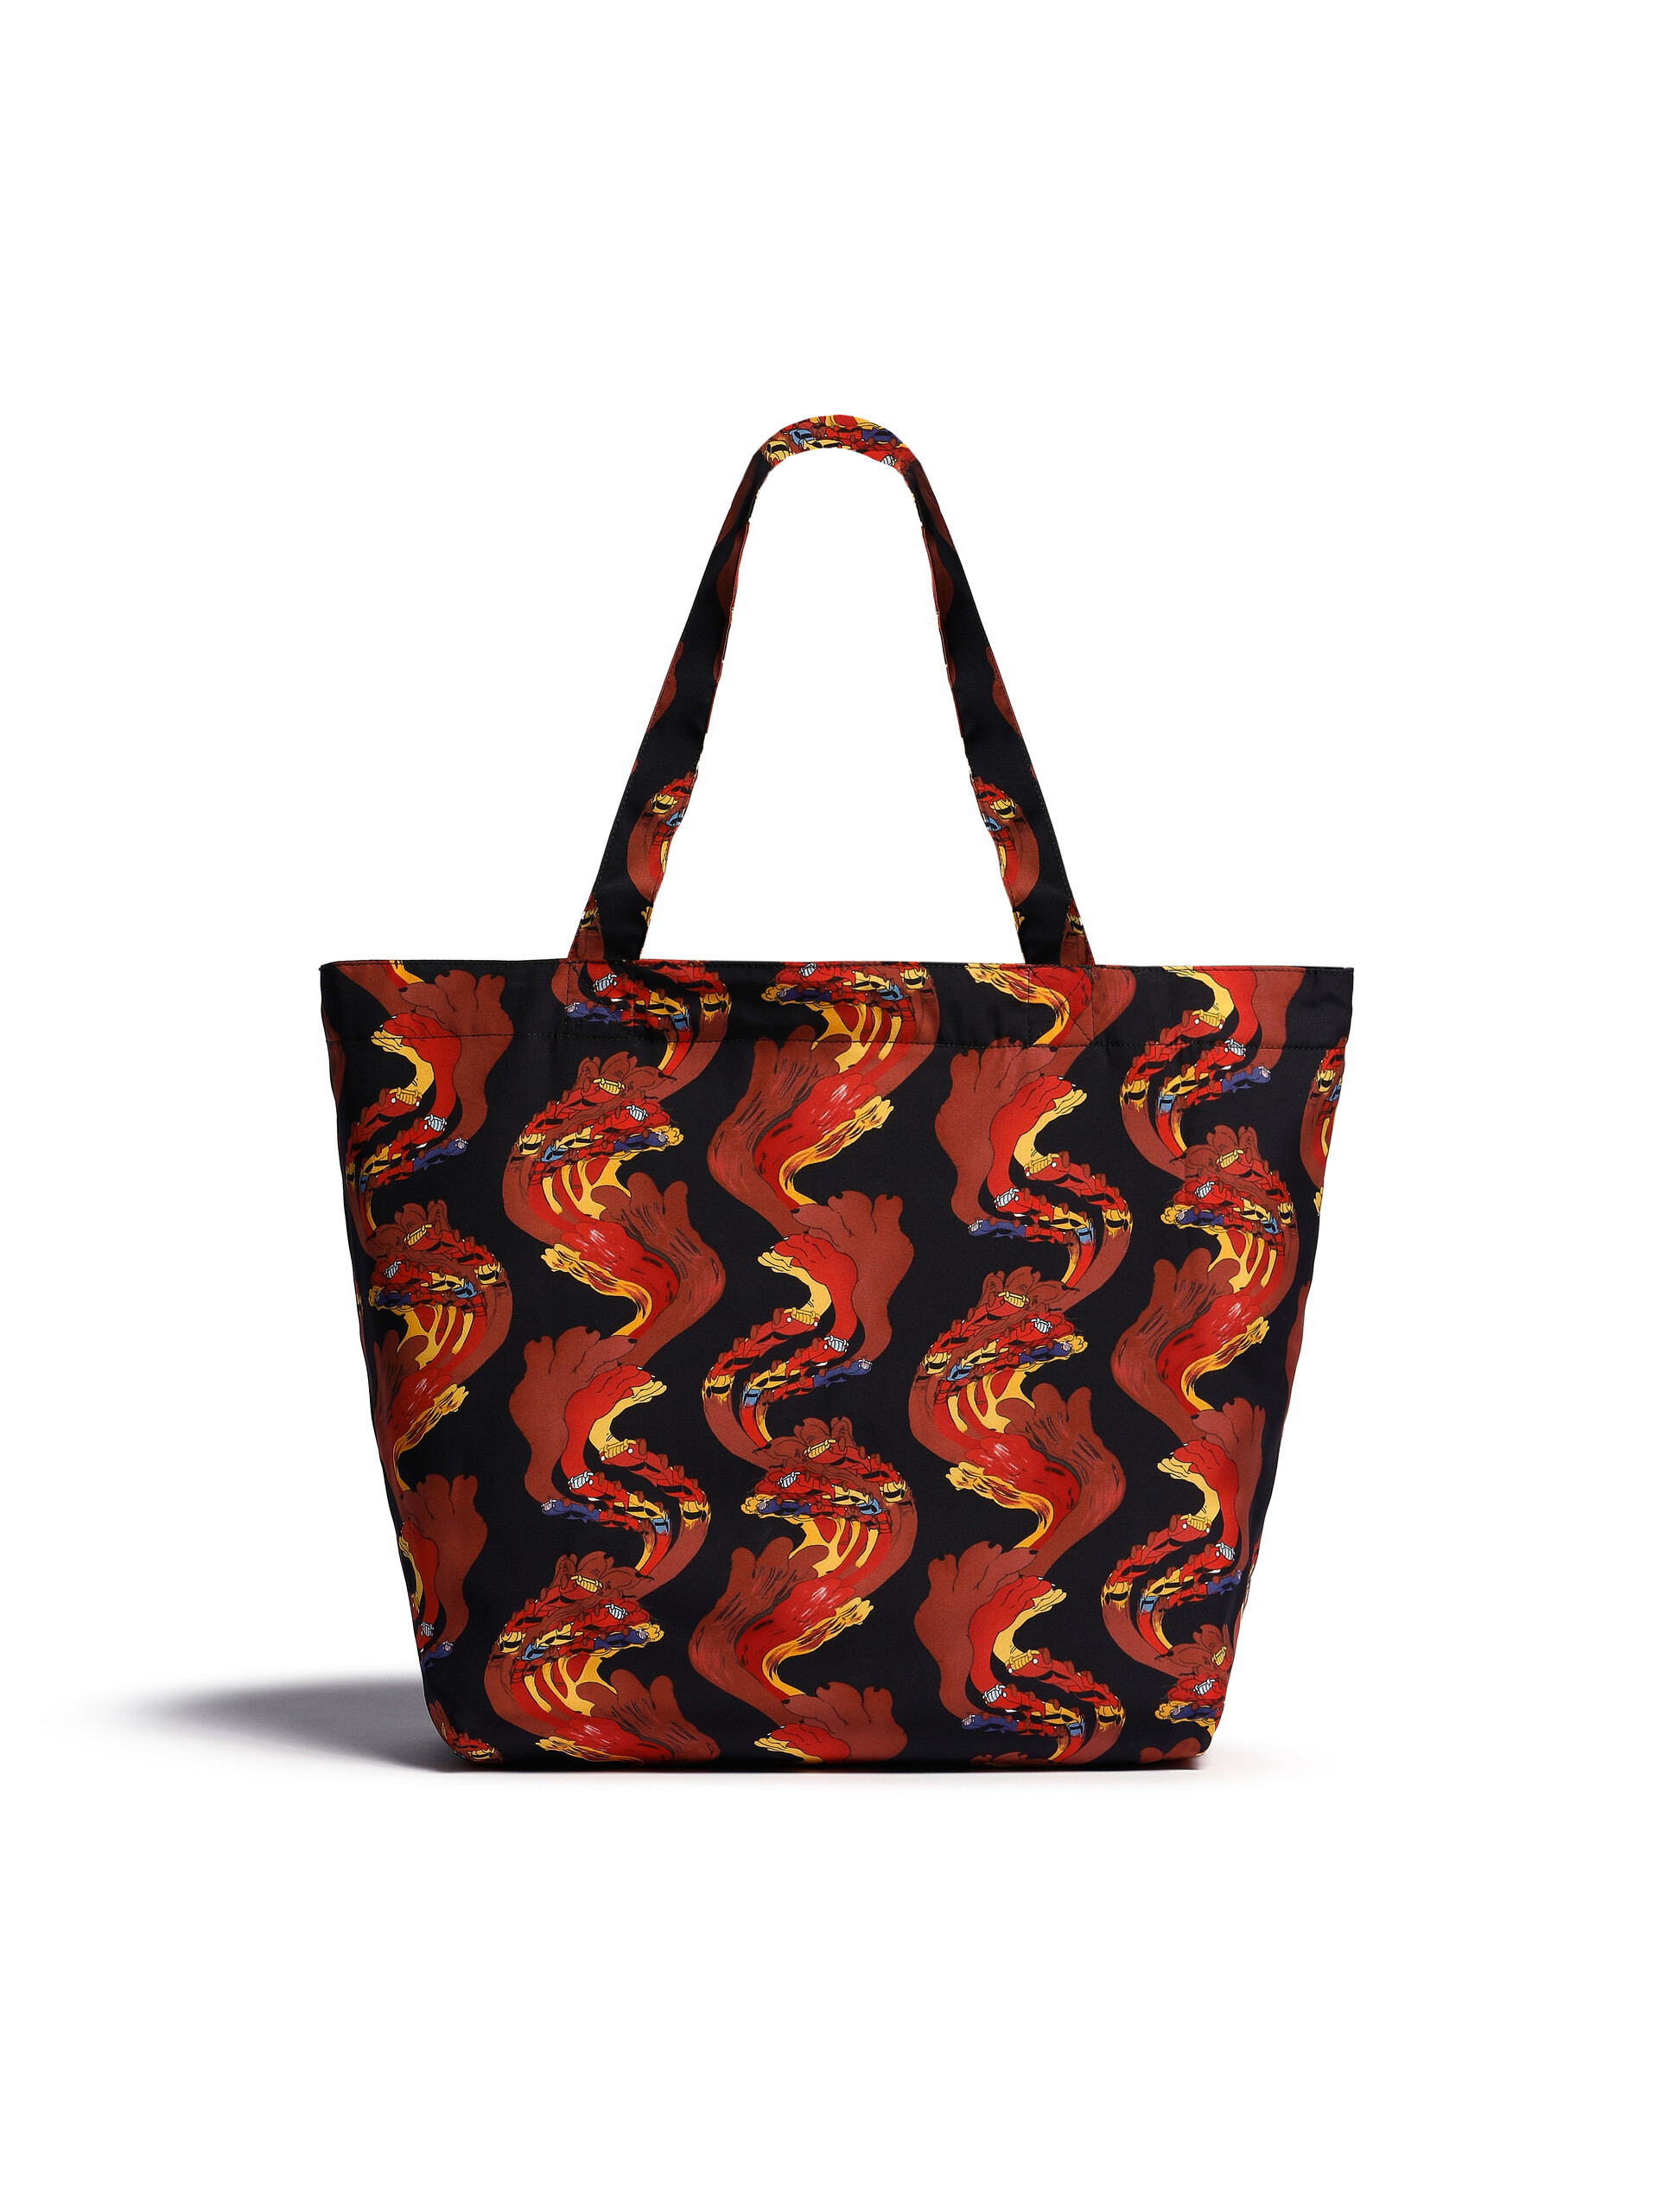 Black viscose tote bag with archival multicoloured print - Shopping Bags - Image 3